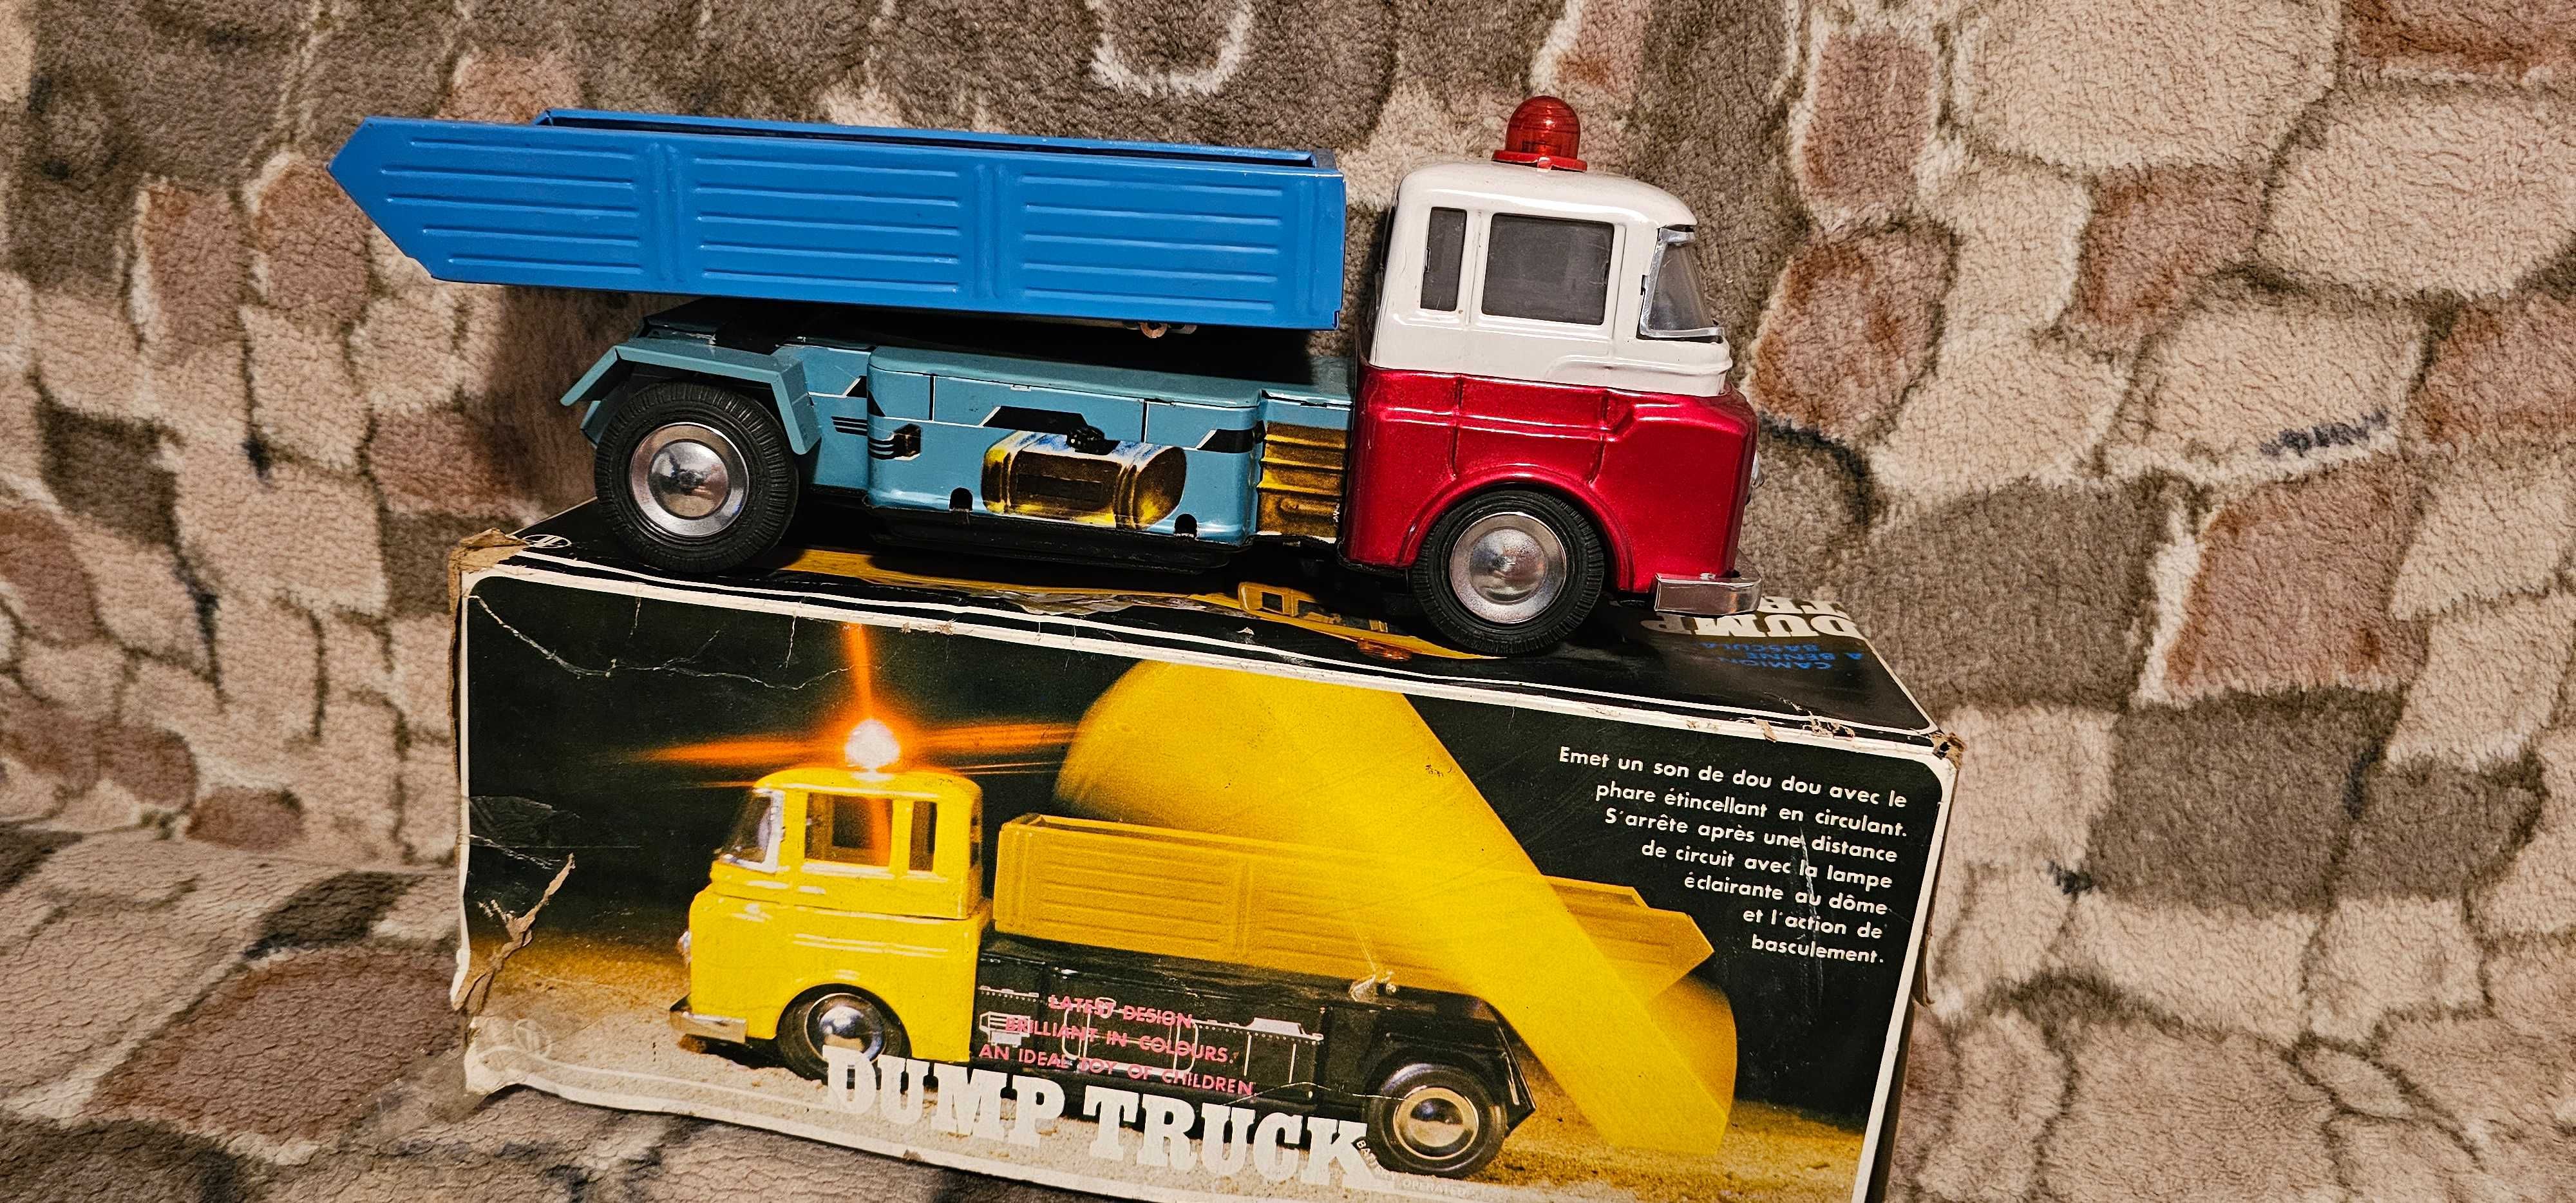 Vintage toy card dump truck batery operated